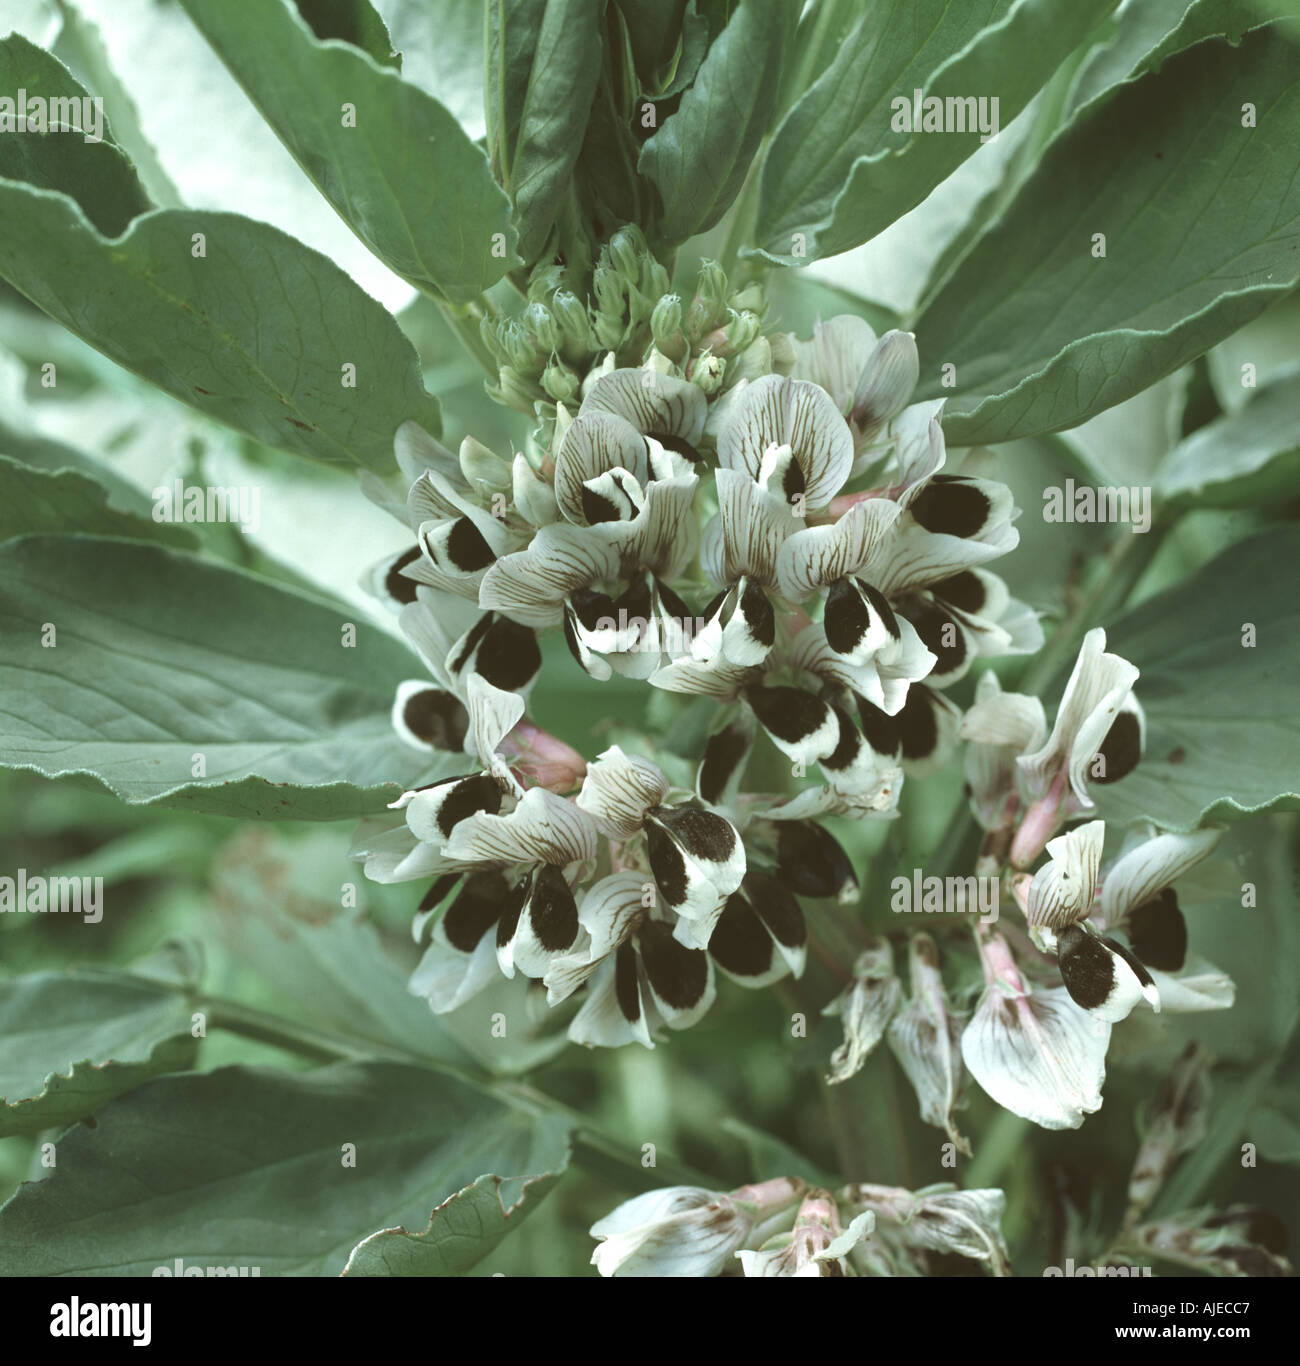 Broad bean Vicia faba dense tightly packed black and white flowers among leaves Stock Photo